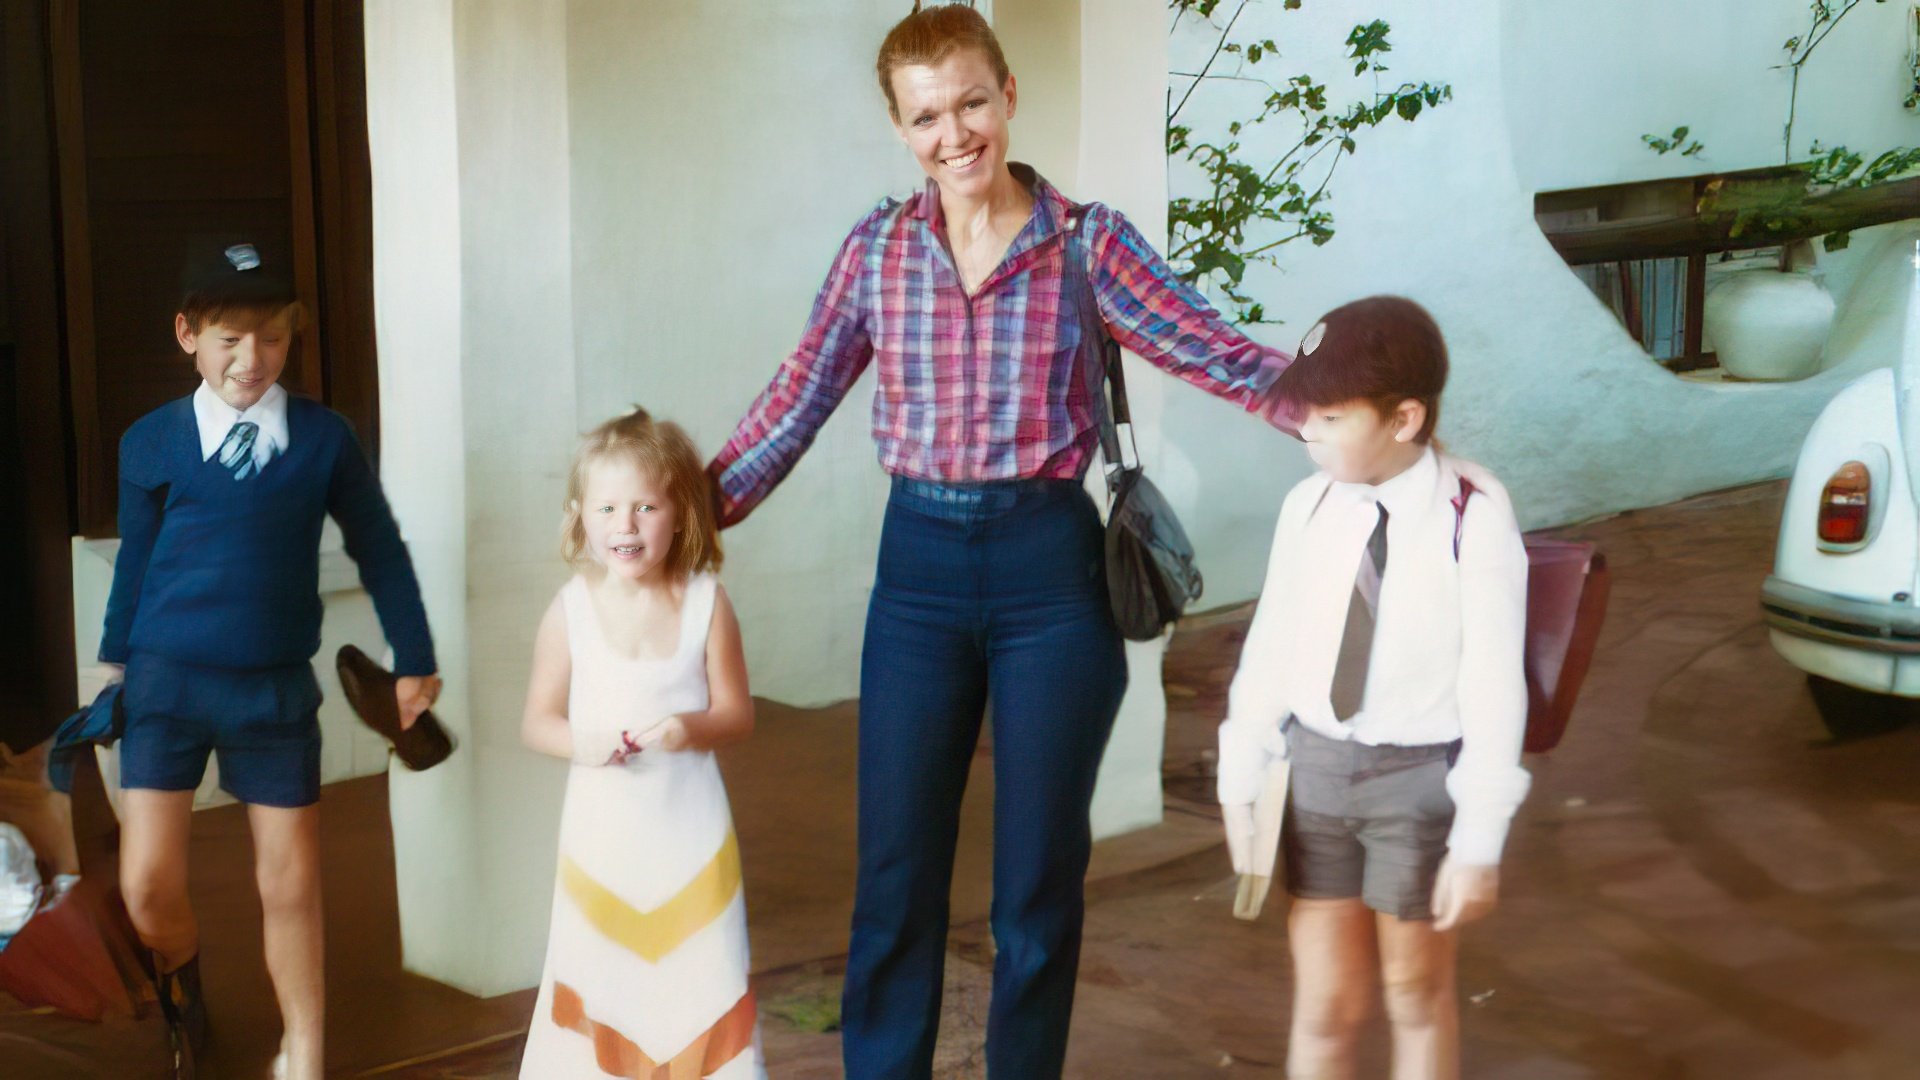 Little Elon (on the right) with his mother, brother and sister